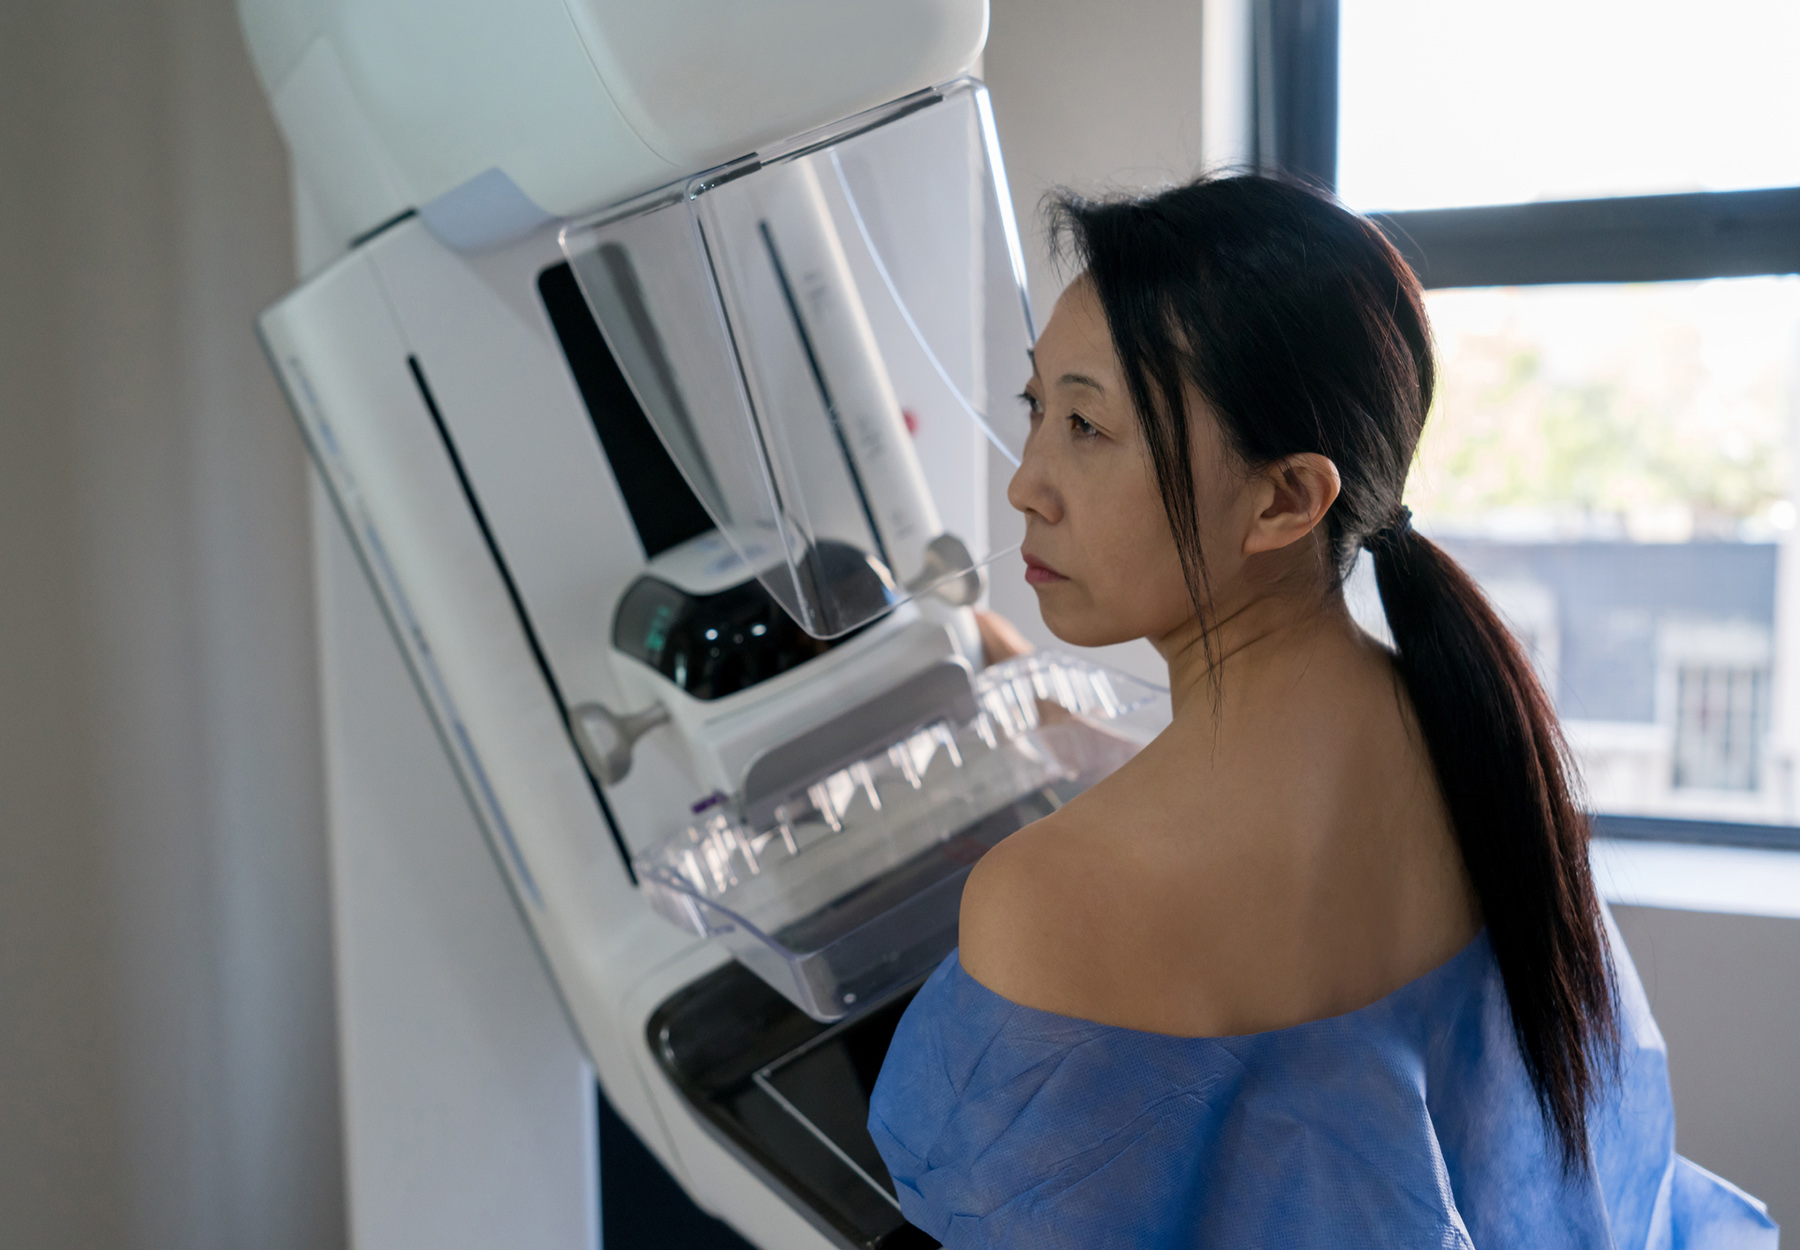 Asian female patient at the hospital getting a mammogram exam using a hospital gown and looking very serious